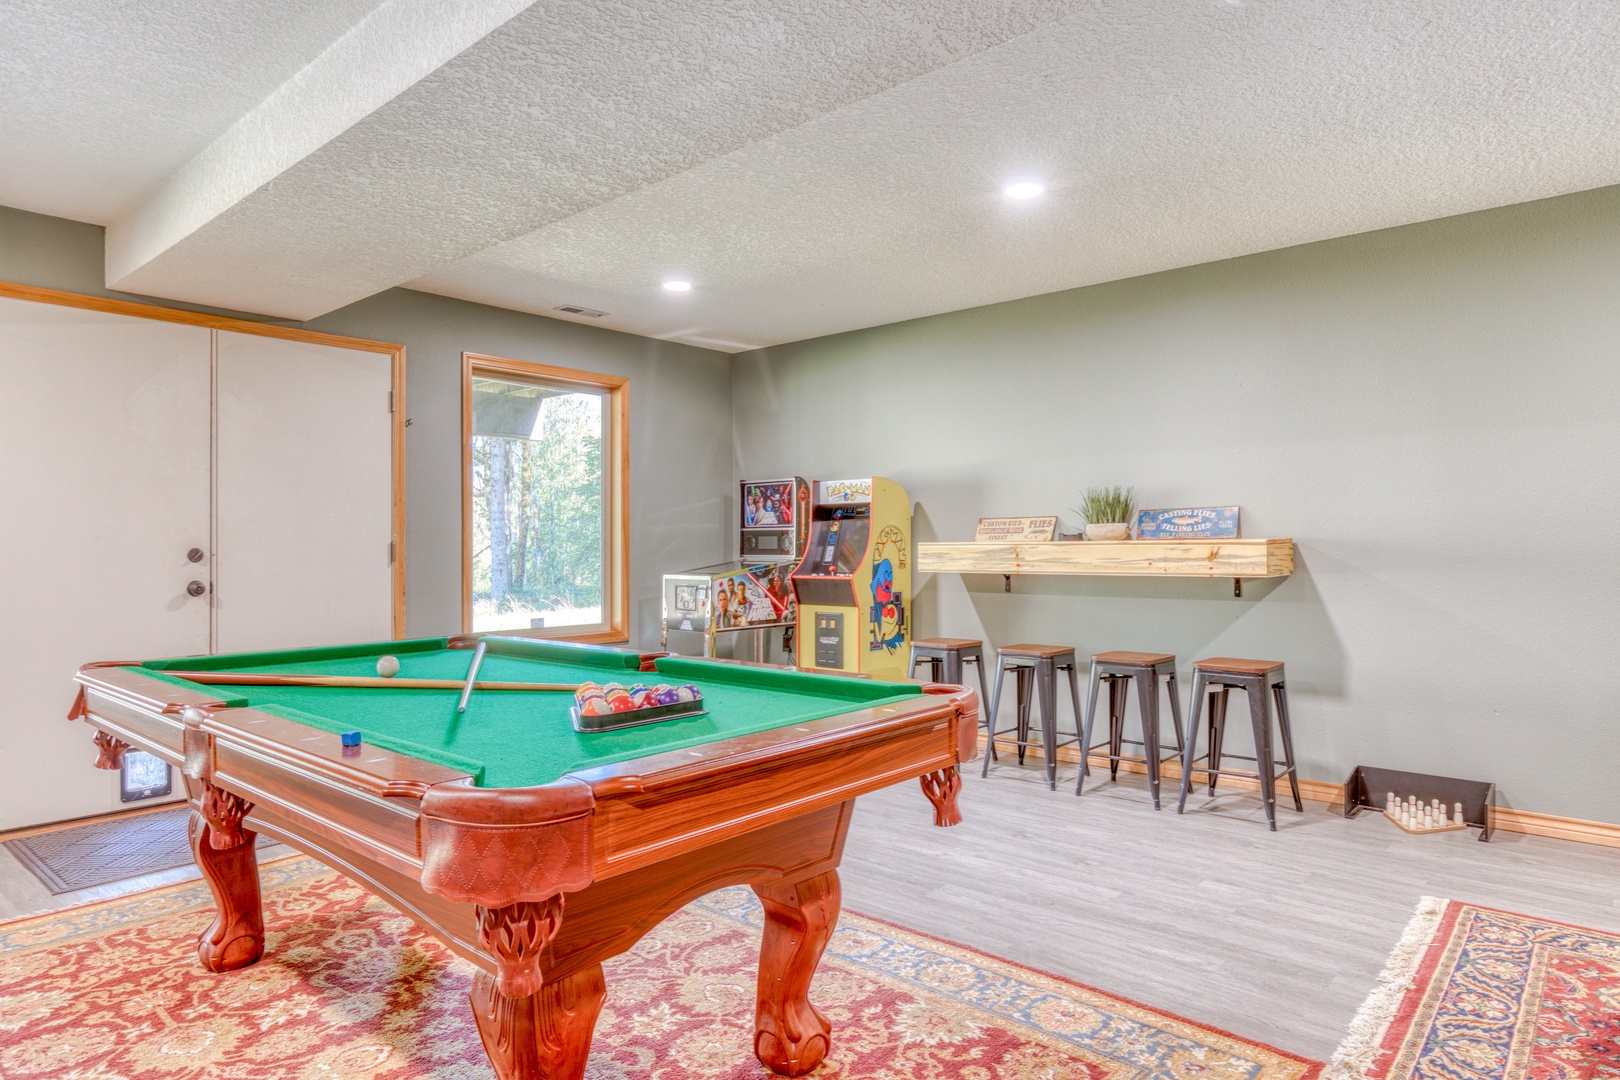 Sandy Vacation Rentals, Iron Mountain - A room dedicated just to play time